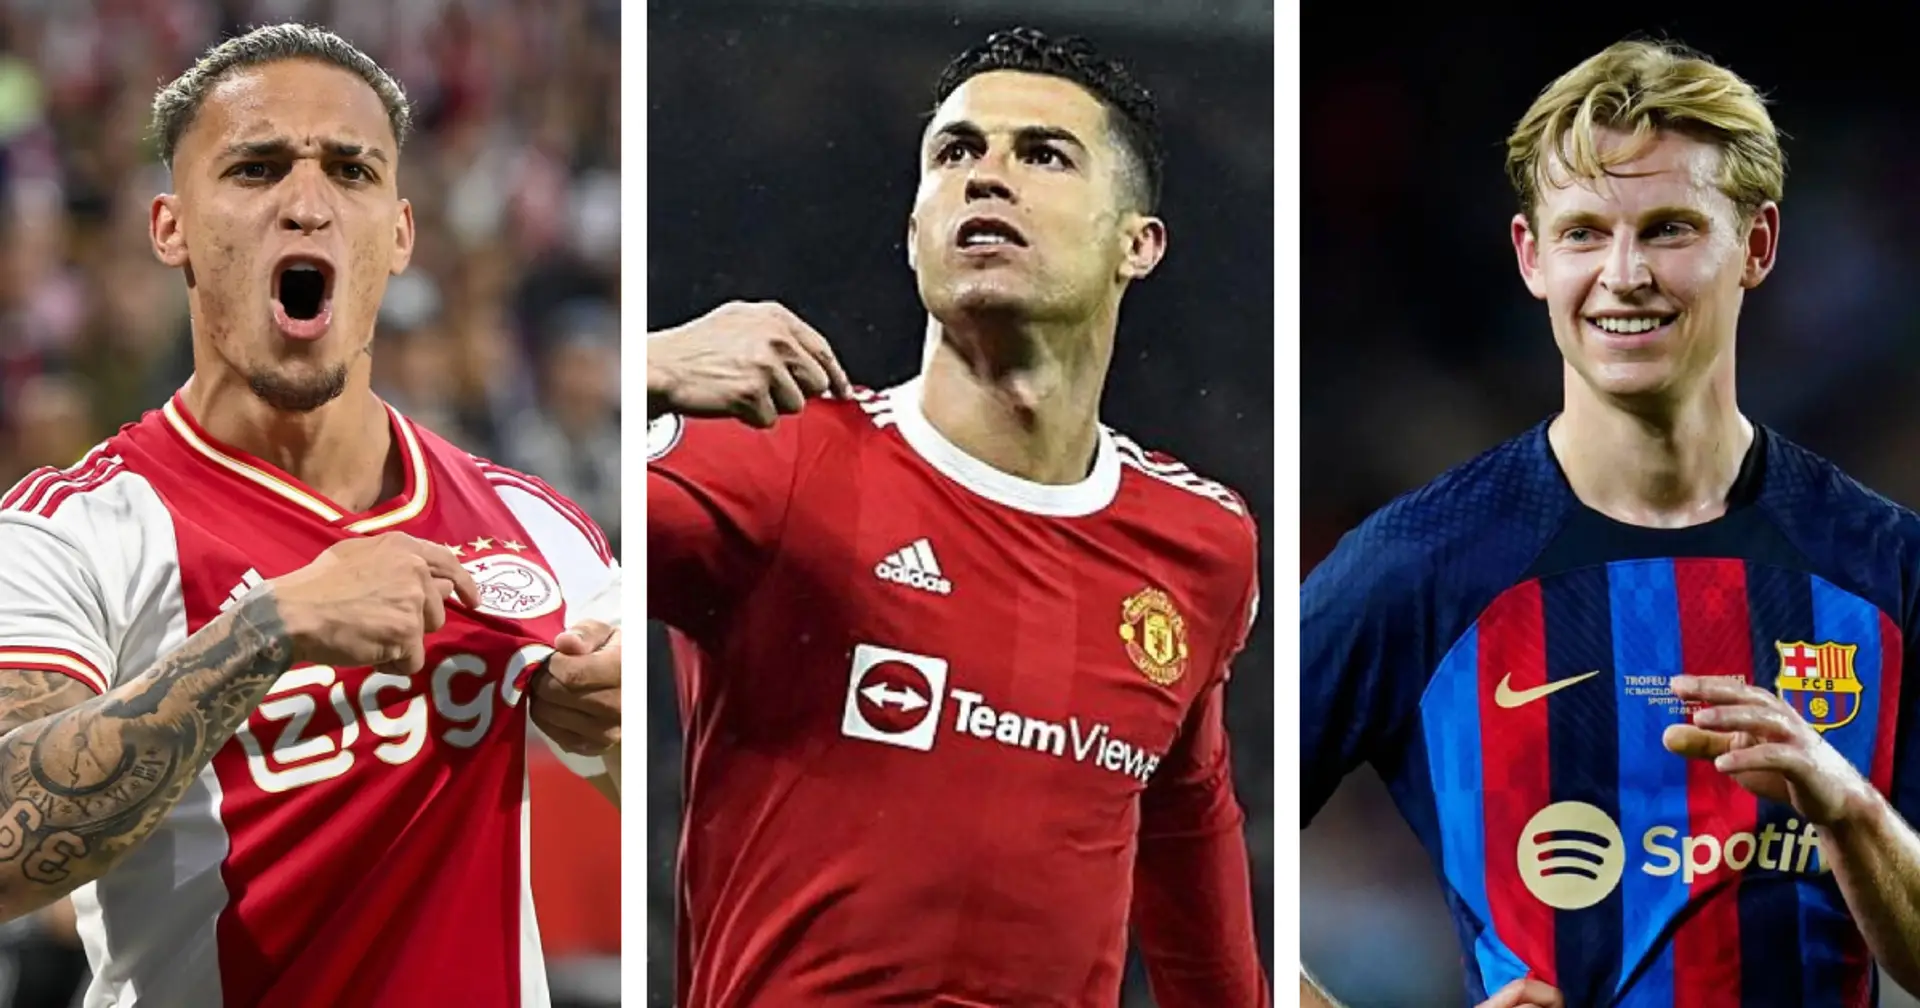 4 things that could still happen at Man United 4 days until transfer deadline